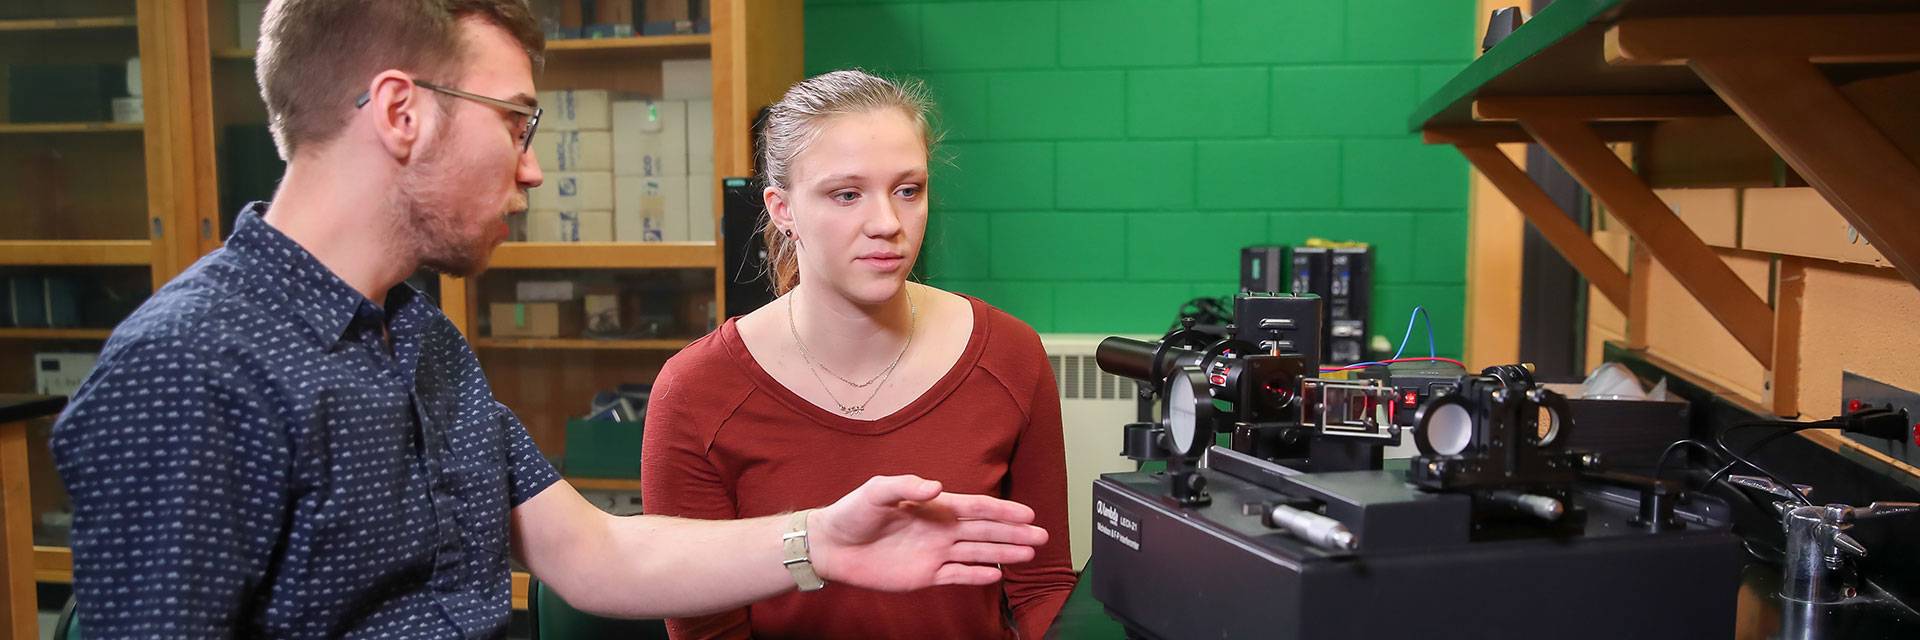 physics student examining laser research station